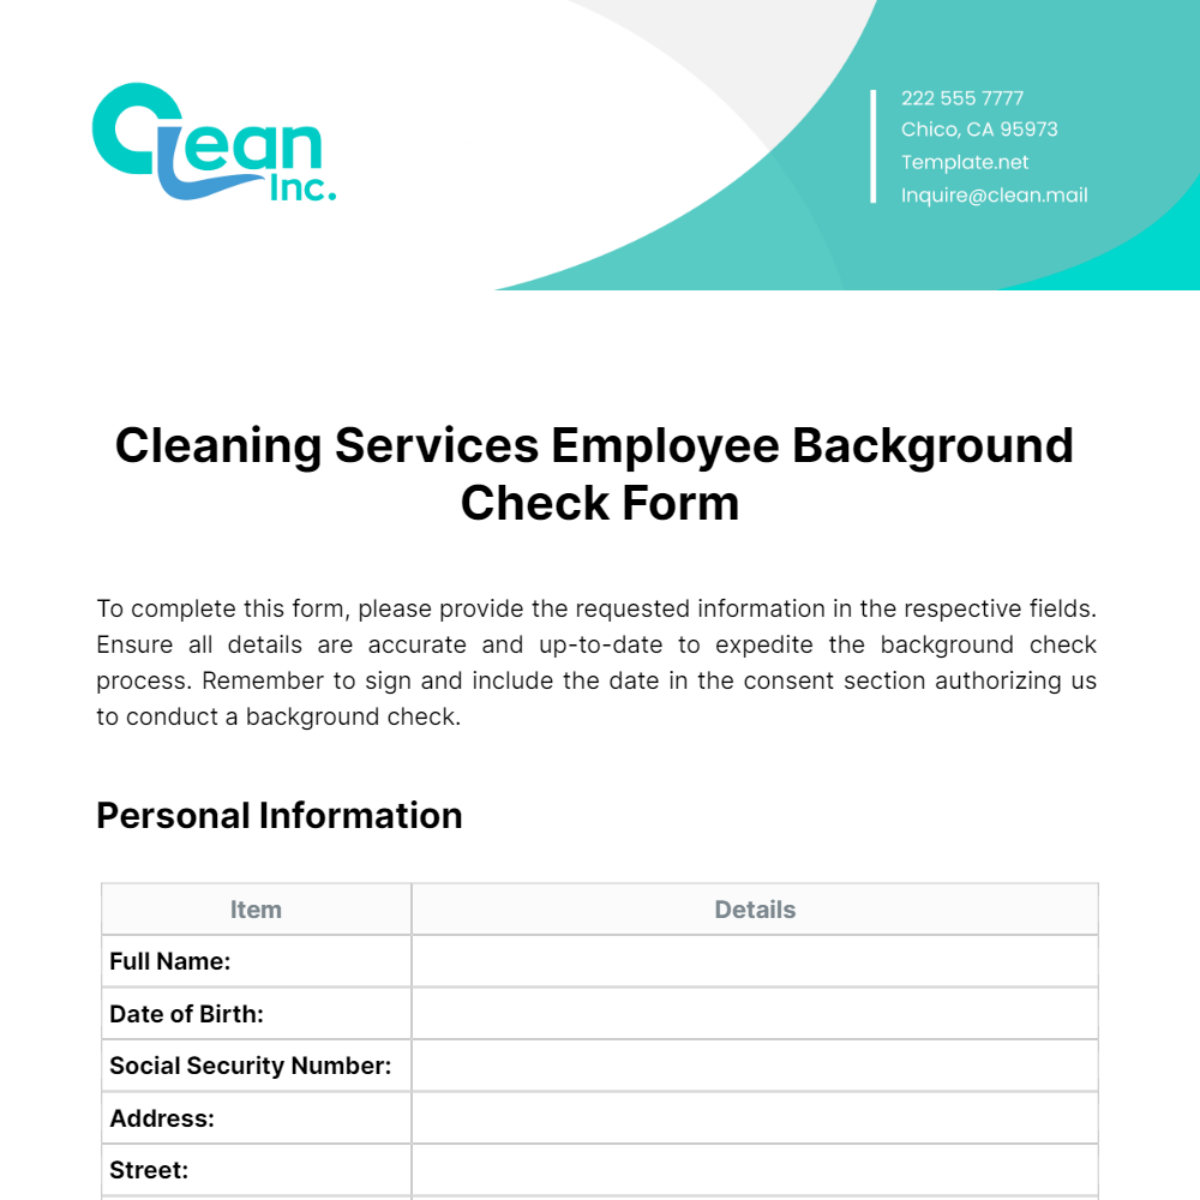 Cleaning Services Employee Background Check Form Template